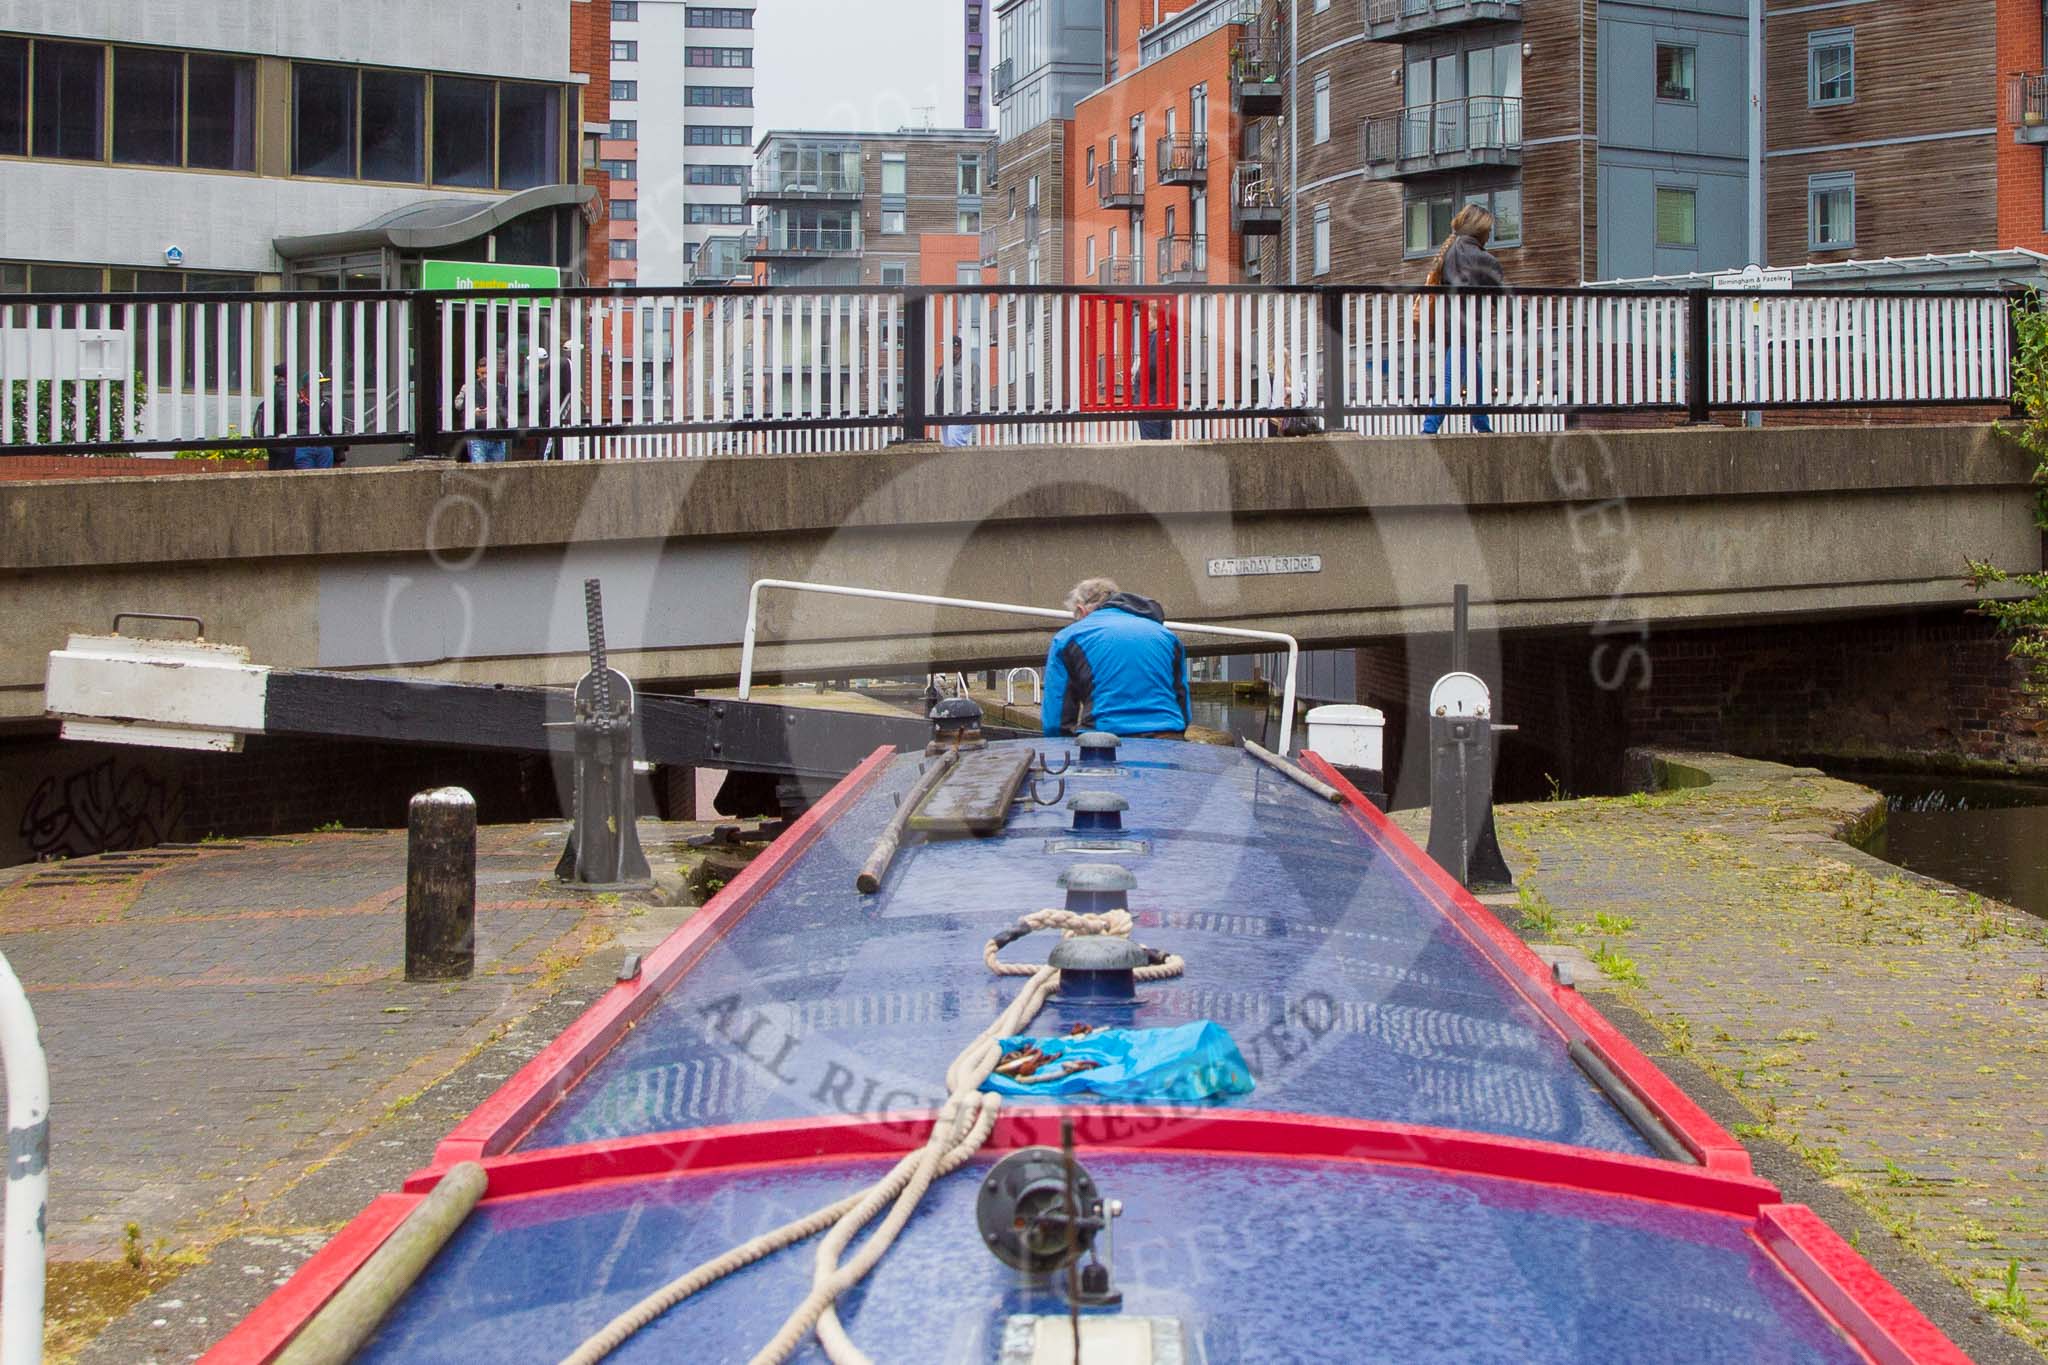 BCN Marathon Challenge 2014: Narrowboat Felonious Mongoose descending in lock #4 of the Farmers Bridge Flight on the Birmingham & Fazeley Canal at Saturday Bridge.
Birmingham Canal Navigation,


United Kingdom,
on 23 May 2014 at 14:03, image #21